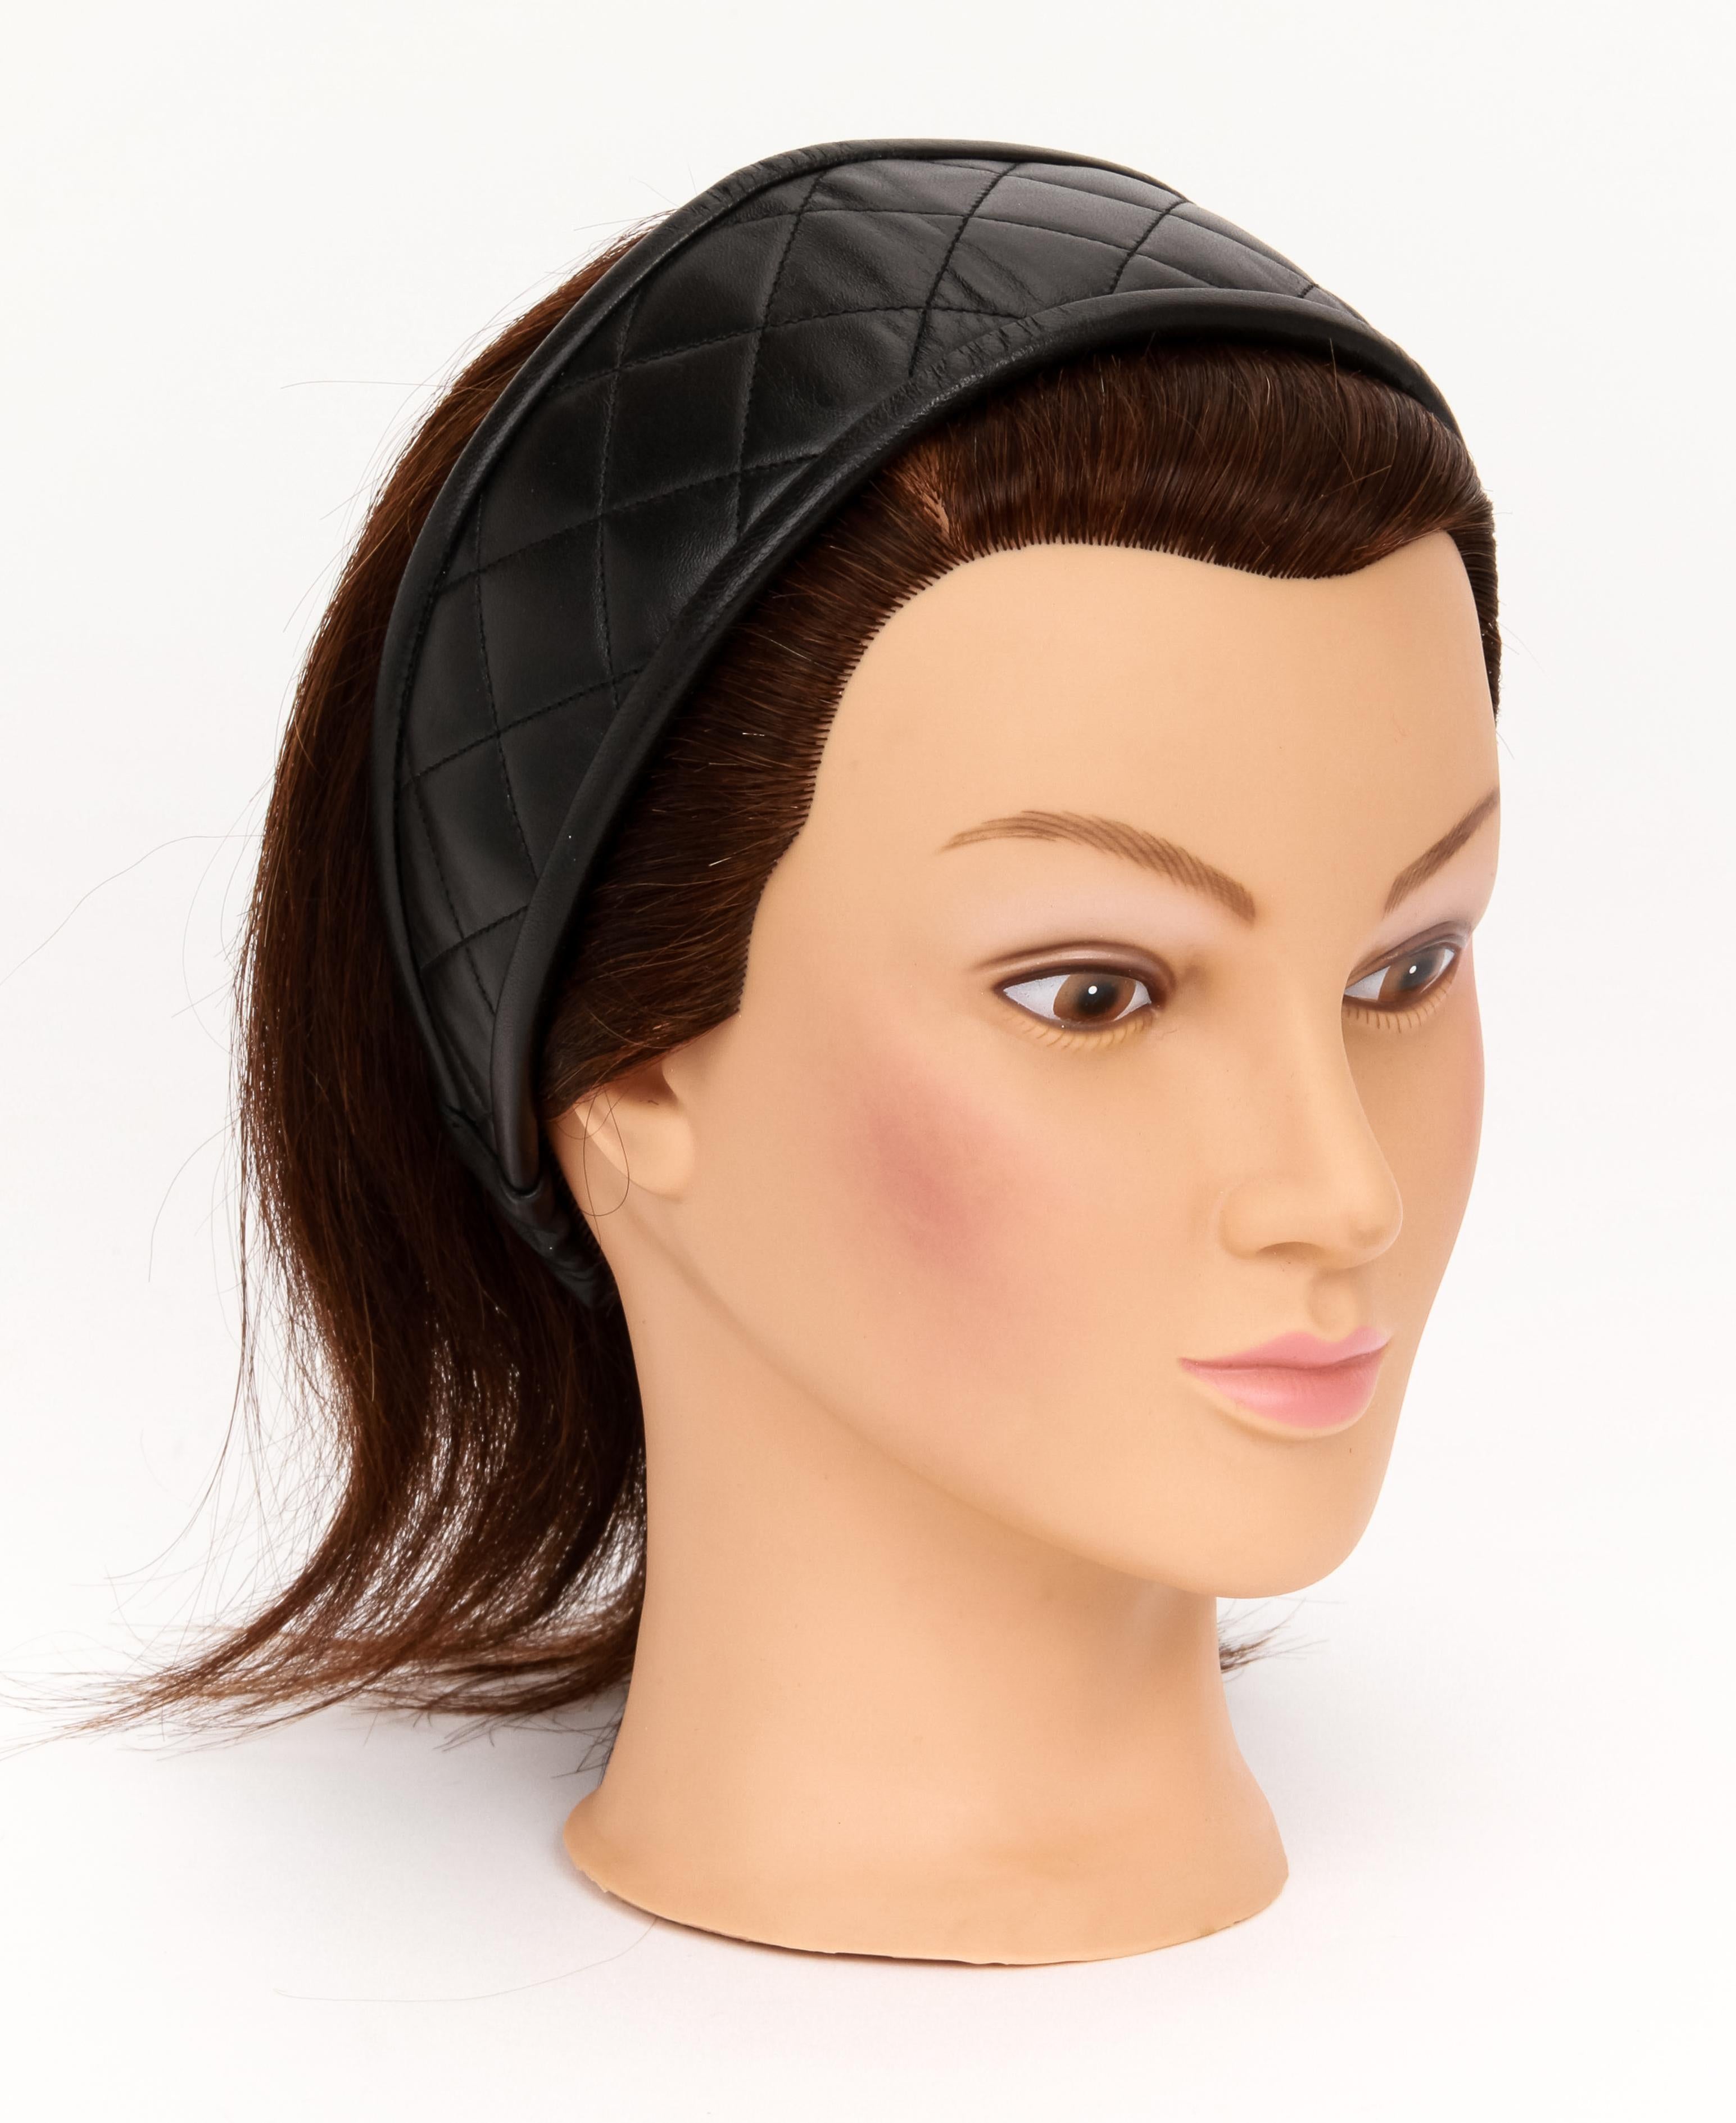 Chanel rare and collectible black quilted headband. Black, white and platinum lambskin. Excellent condition with original tag. One size fits all. Comes with original dust cover.